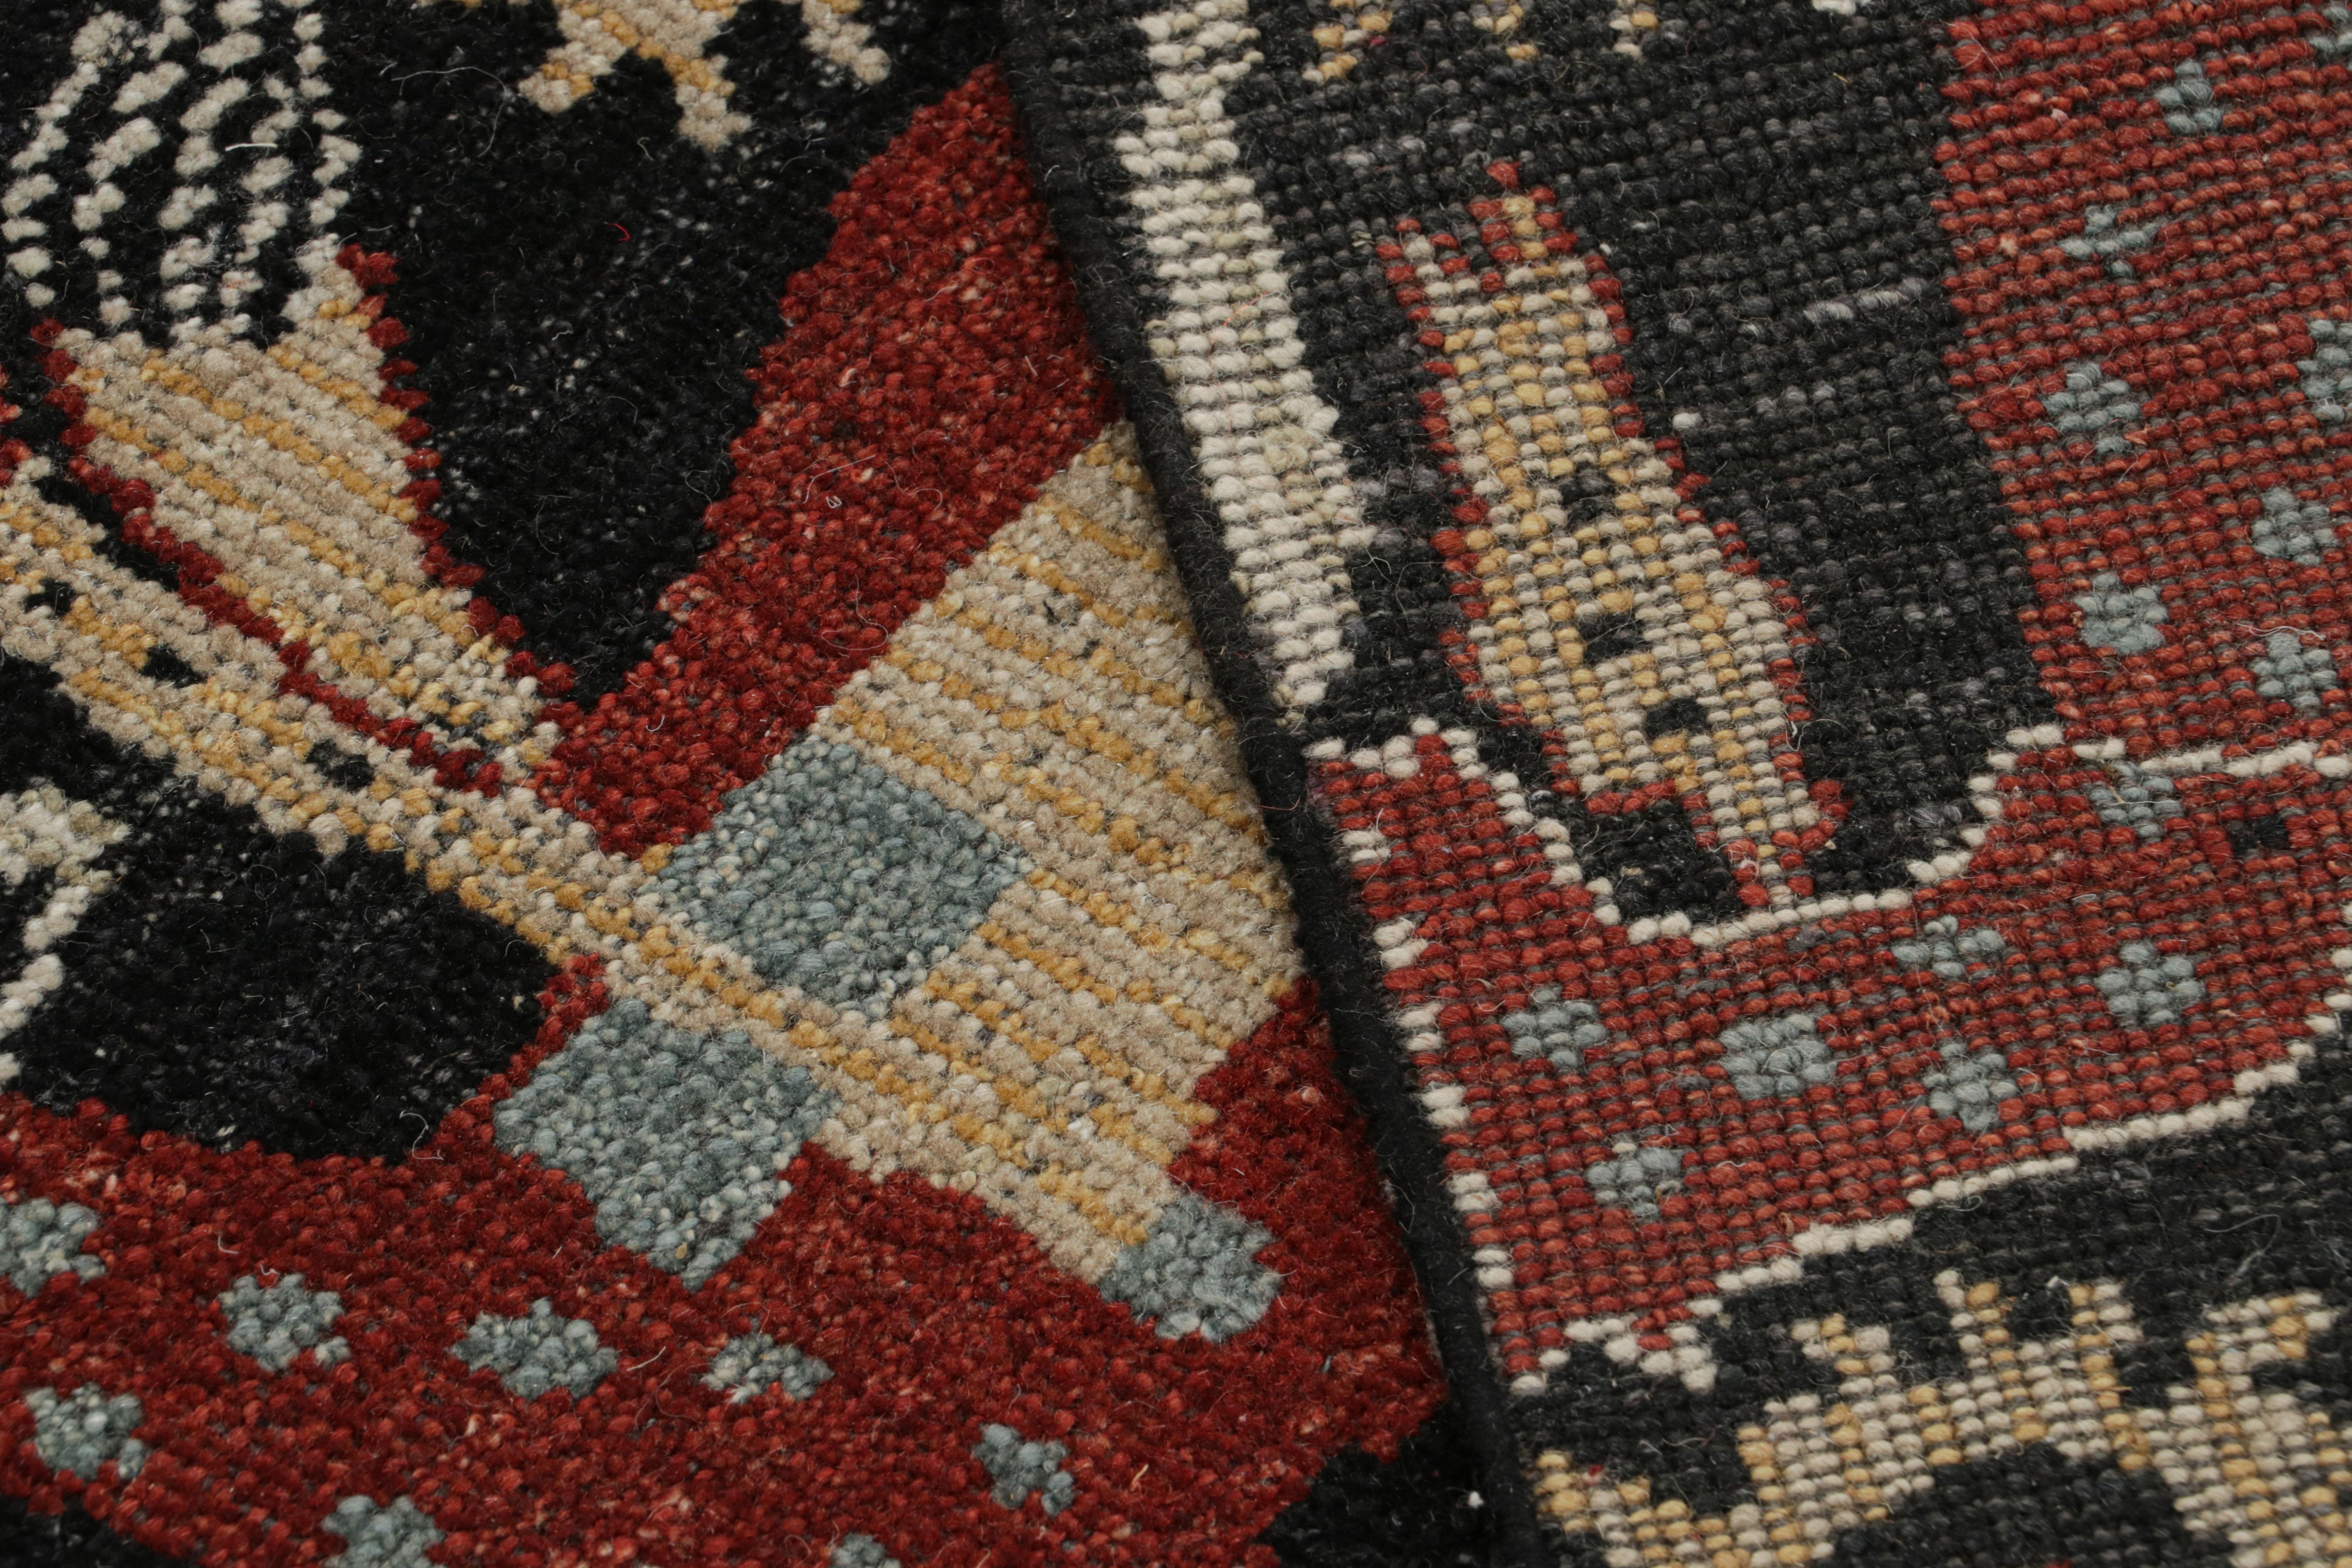 Contemporary Rug & Kilim’s Caucasian-Style Rug in Black with Horseback Rider Pictorials For Sale